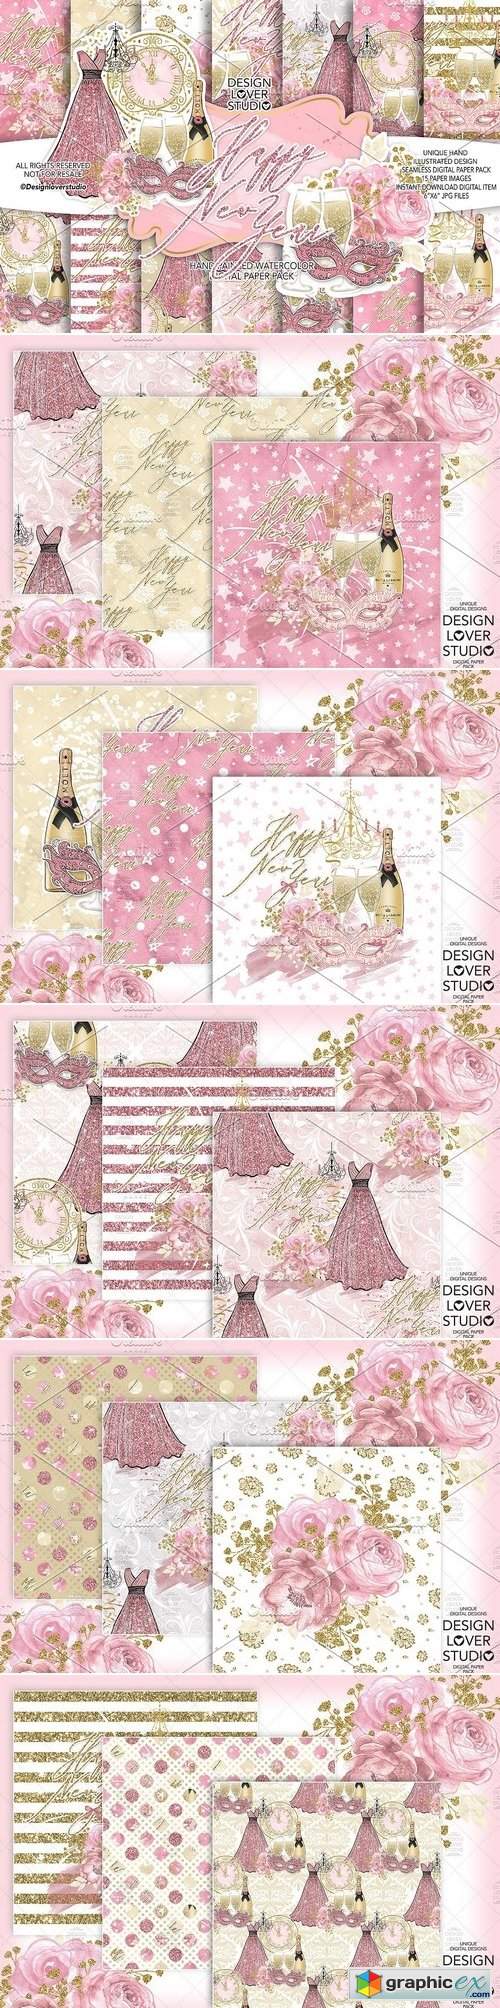 Happy New Year digital paper pack